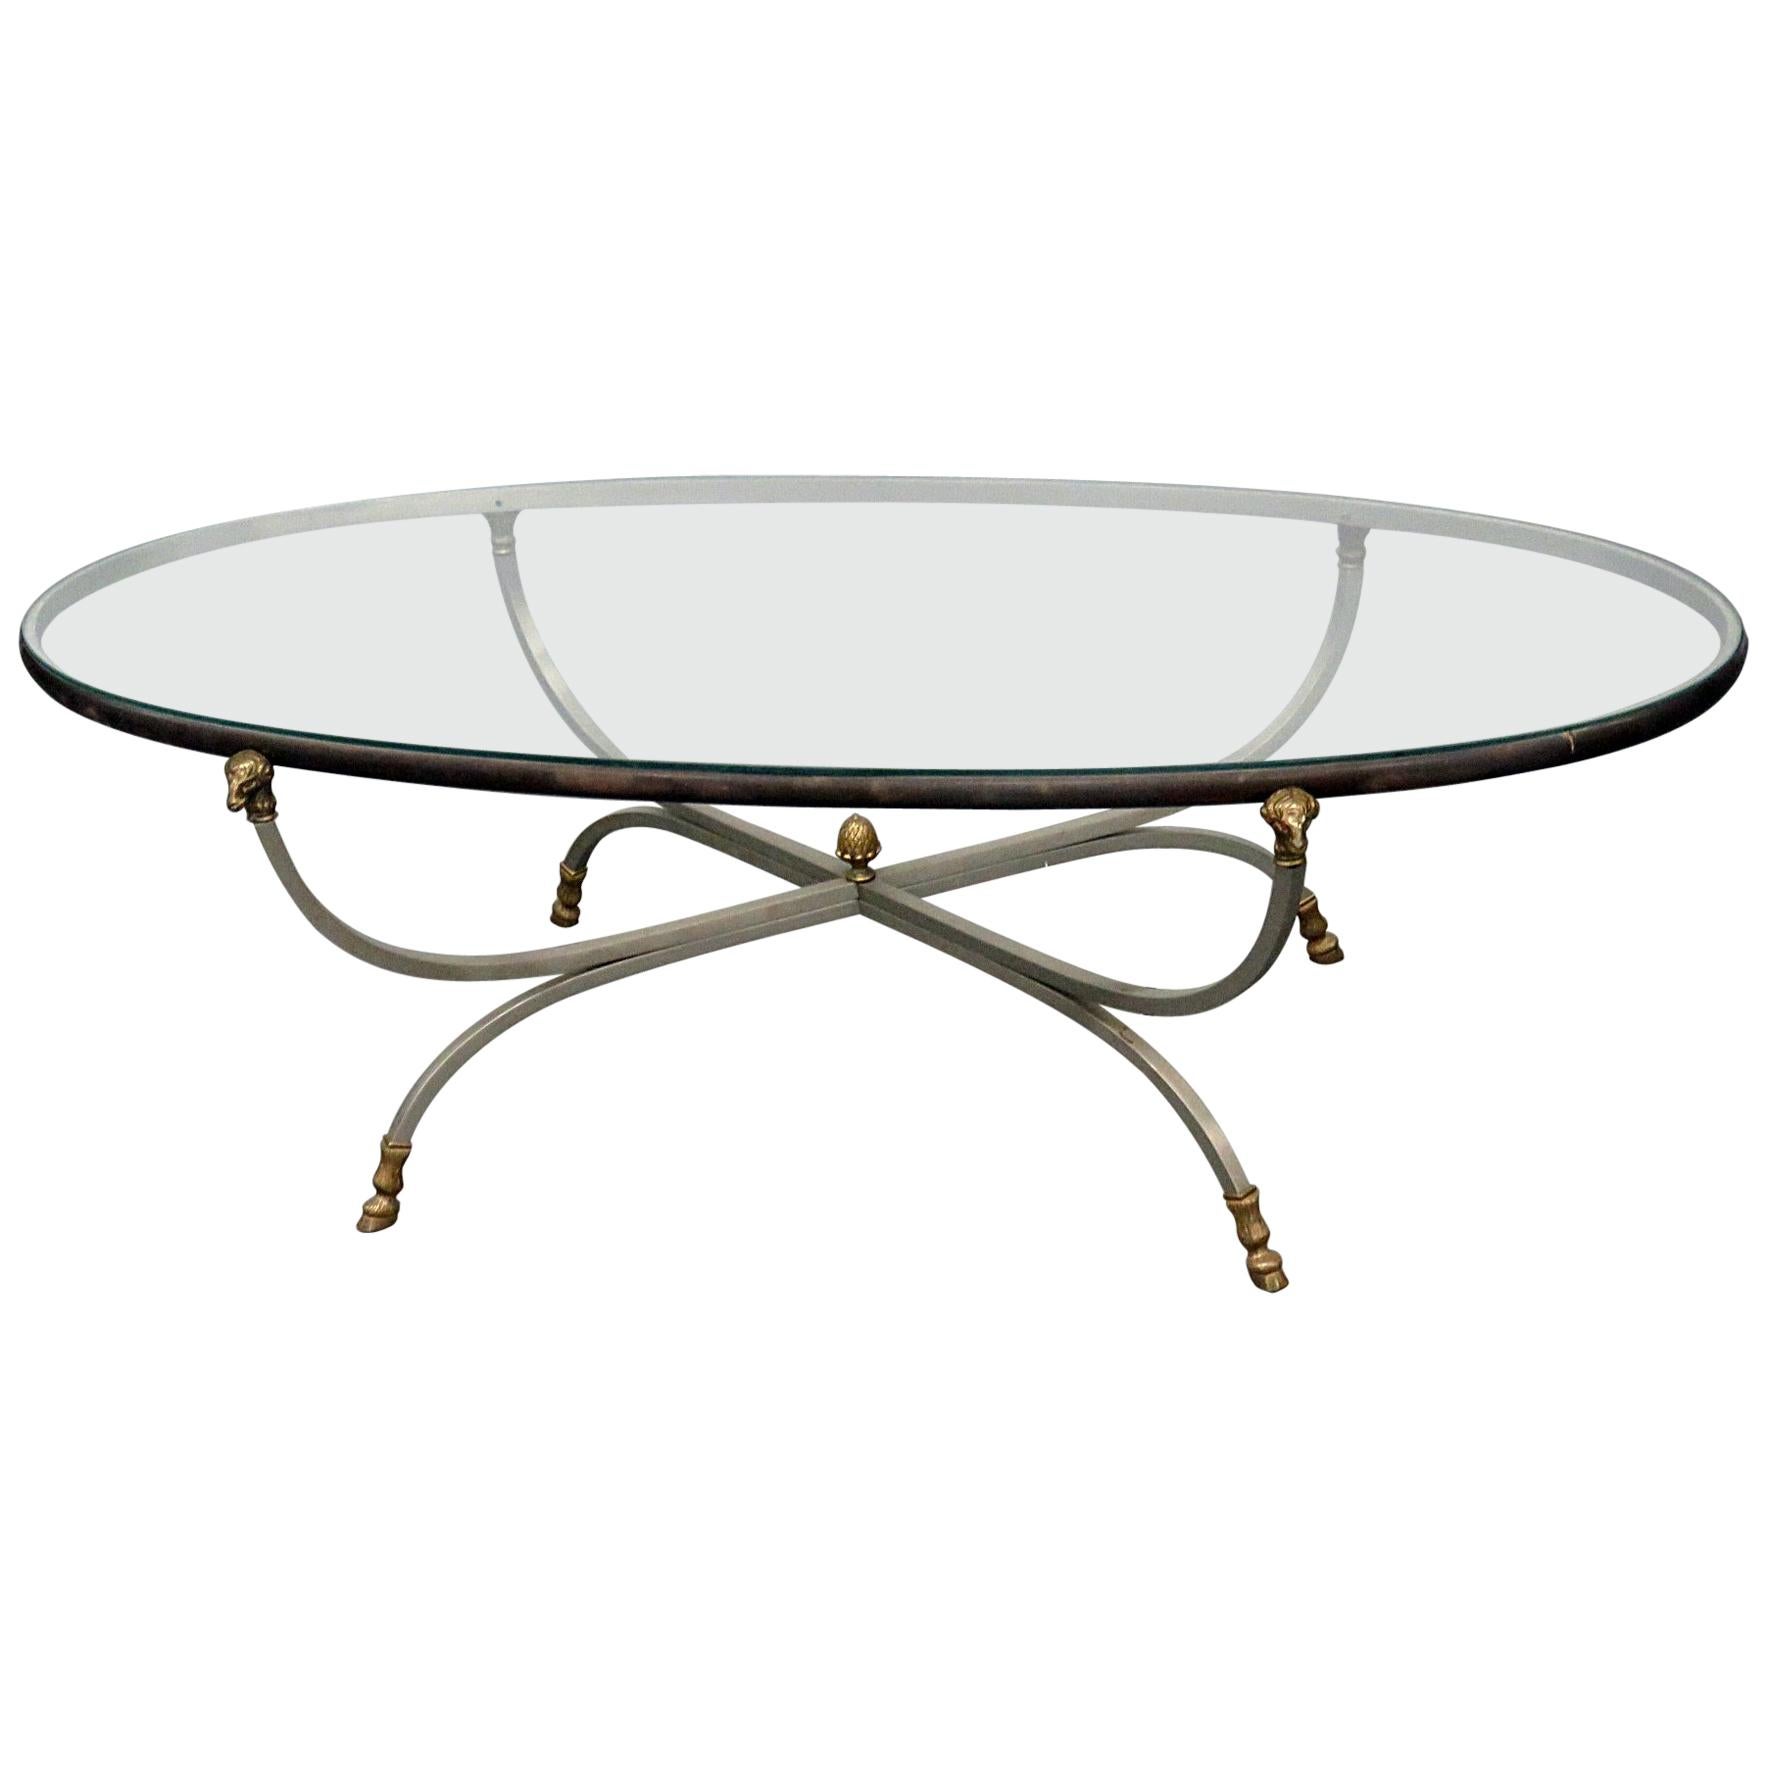 Maison Jansen Rams Head Brass and Steel Style Glass Top Coffee Table